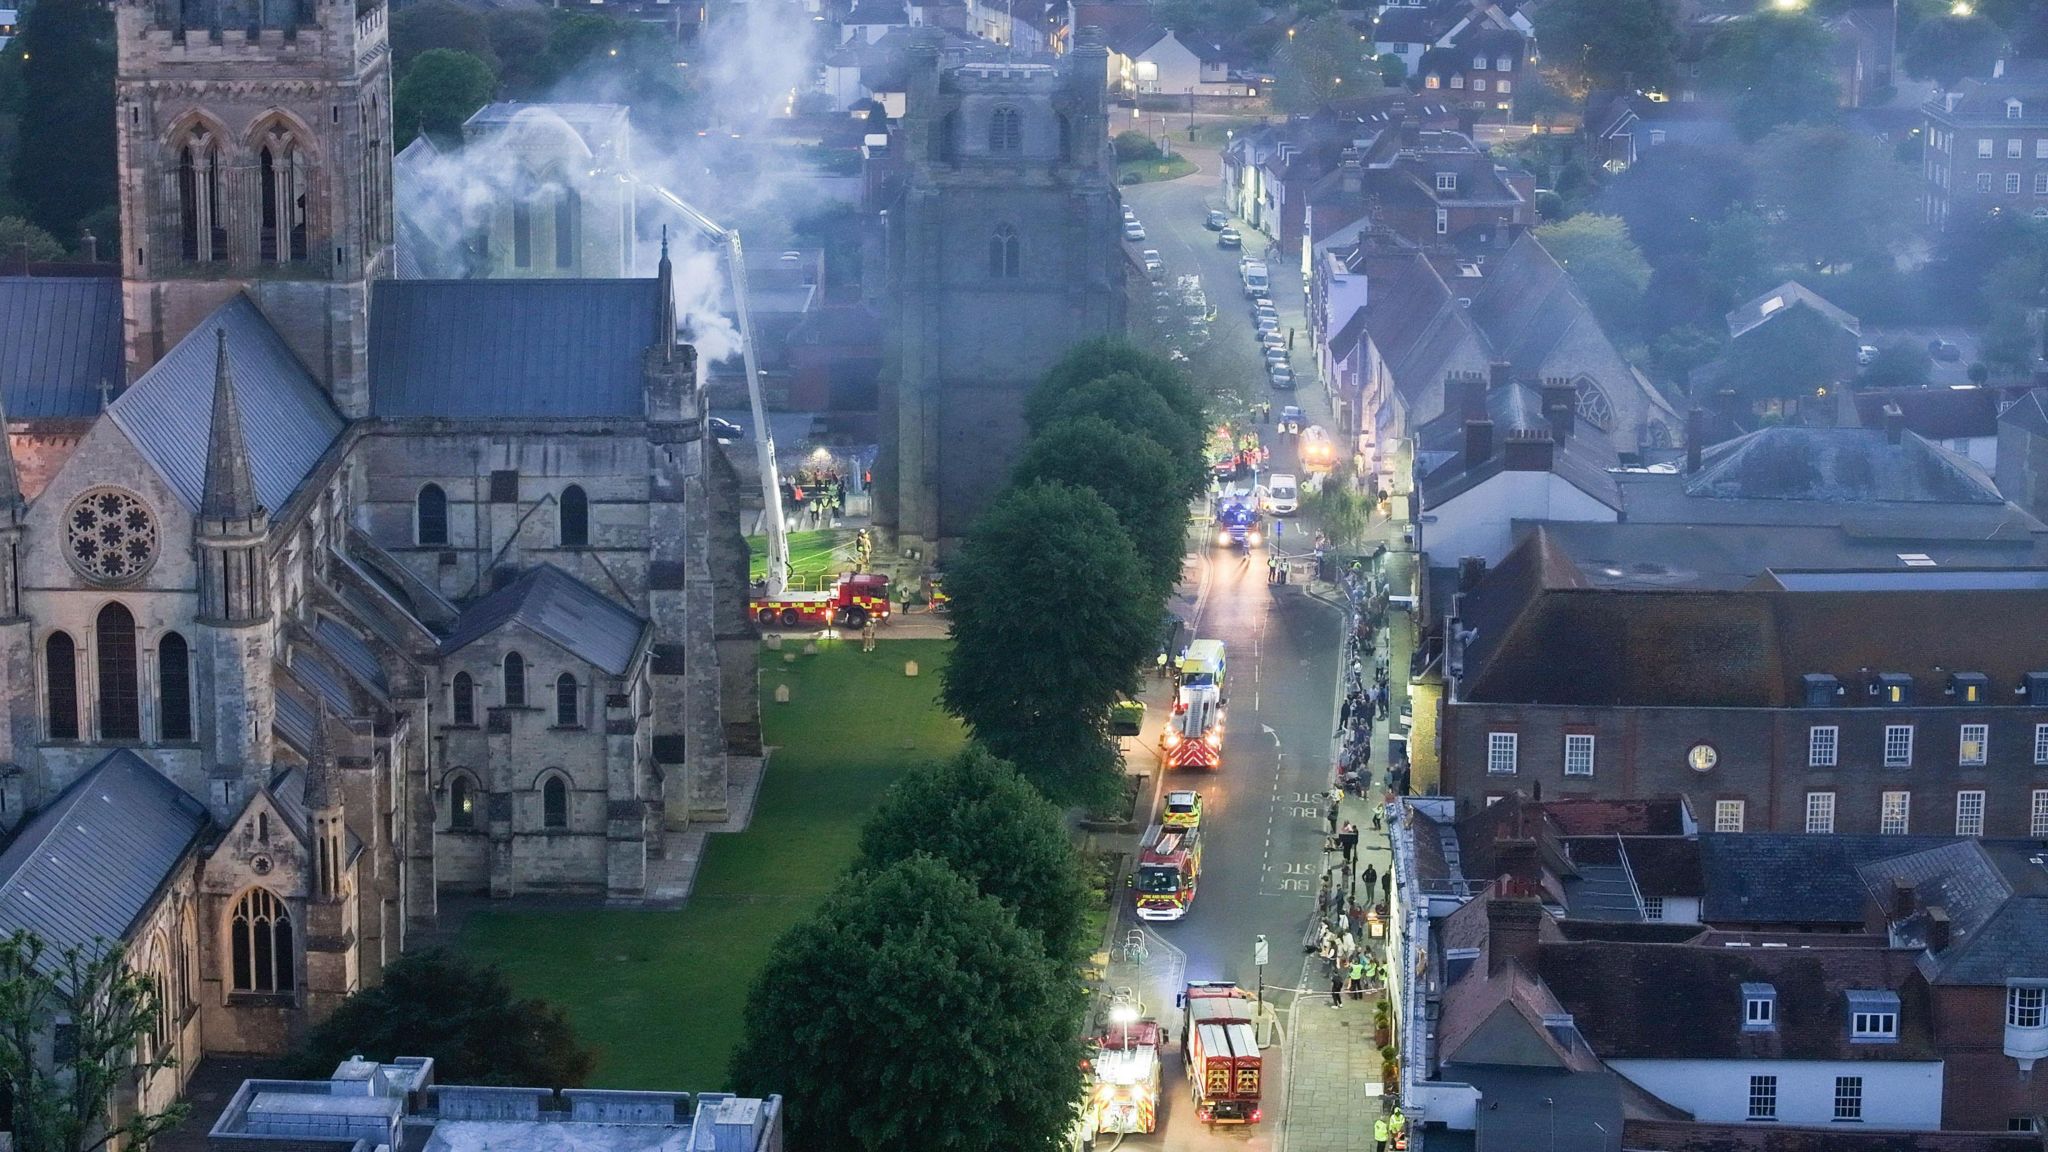 Fire engines on a street by Chichester Cathedral